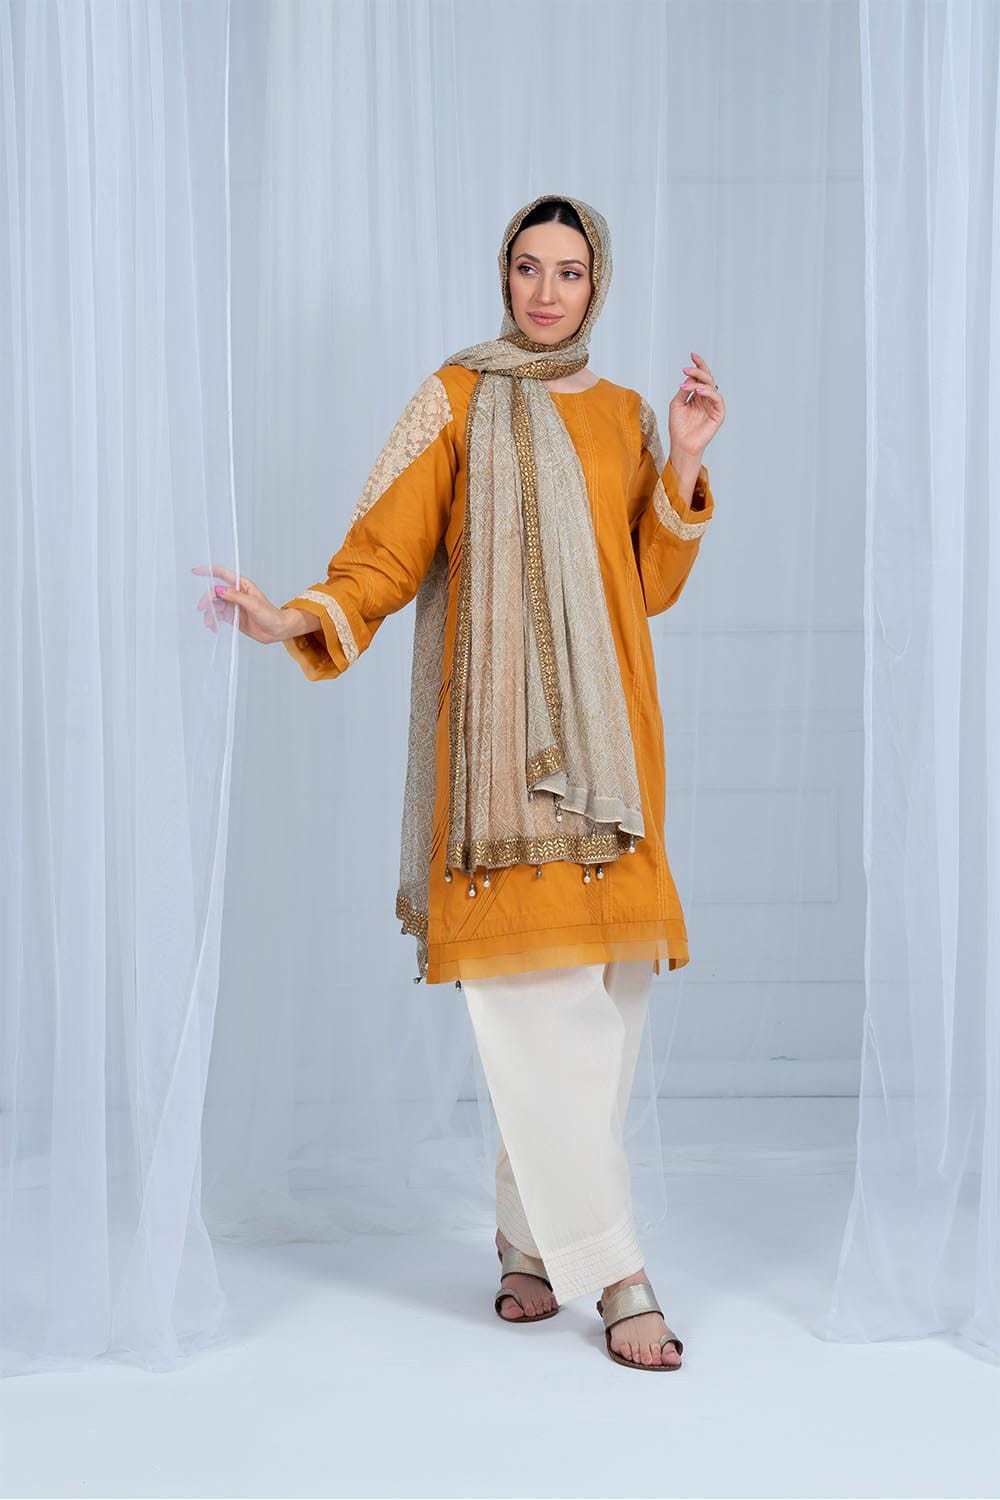 Hope Not Out by Shahid Afridi Eastern Women Trousers Woman Off White Basic Shalwar Flora